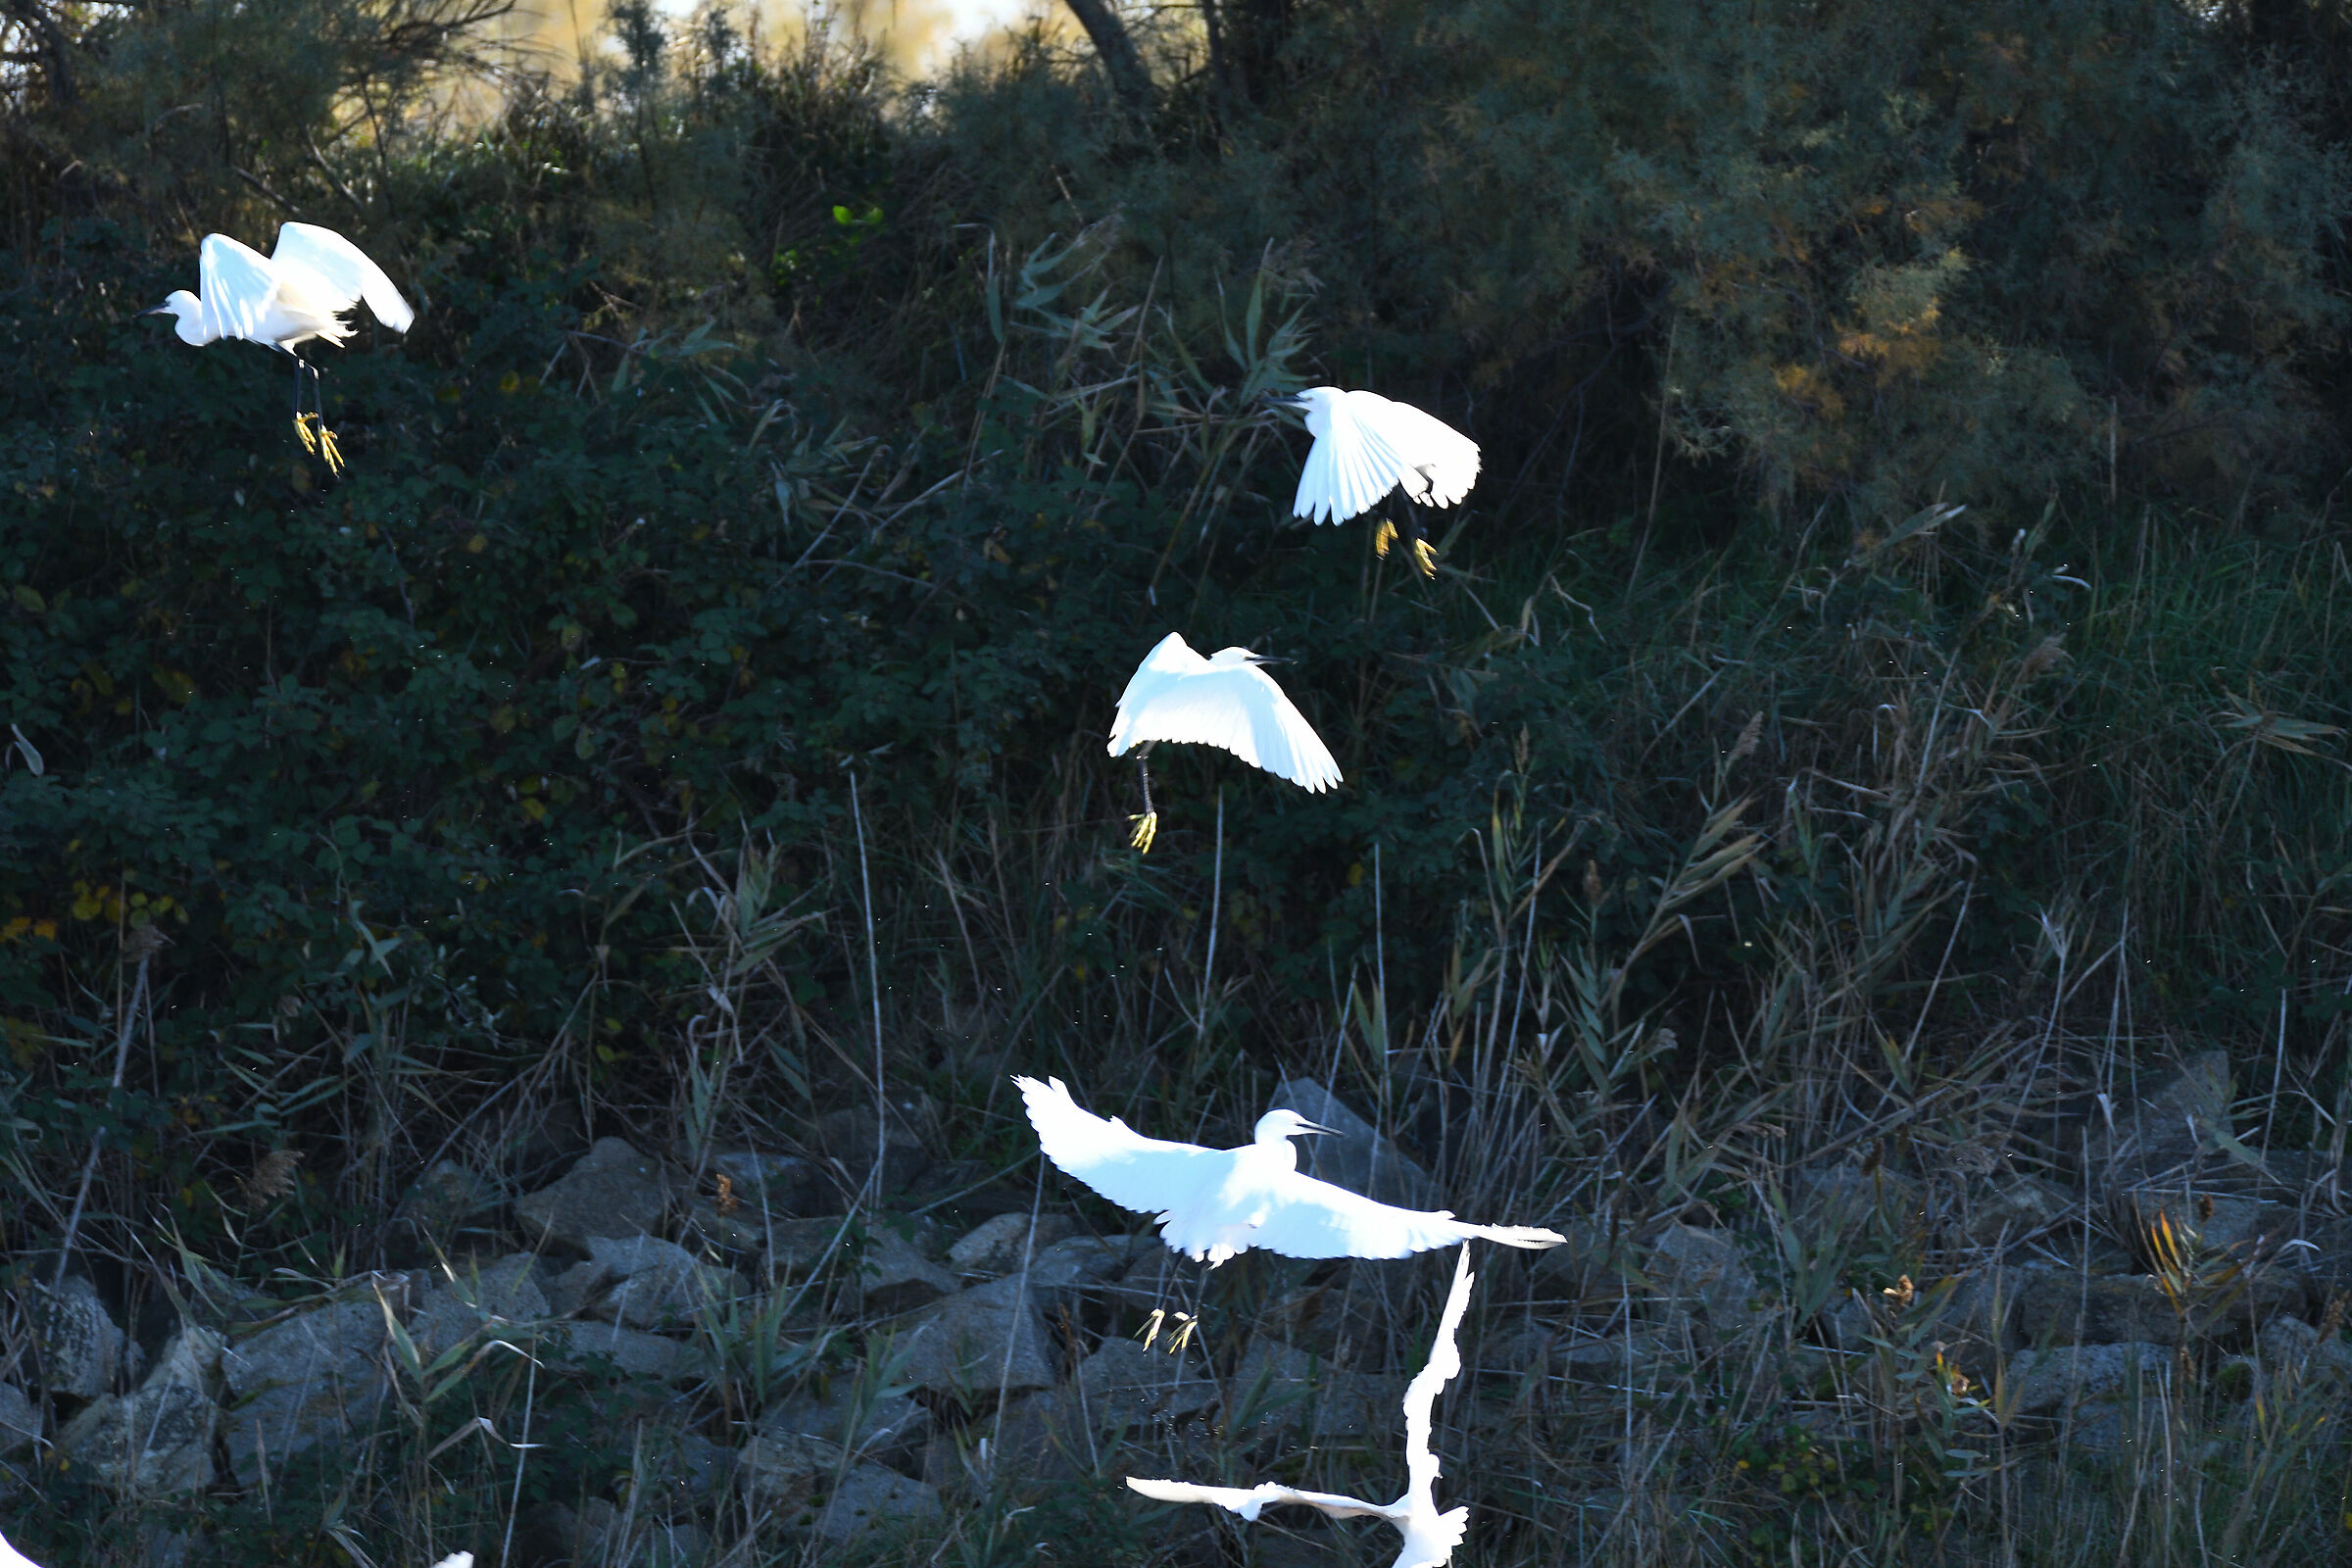 The take-off of the Egrets...